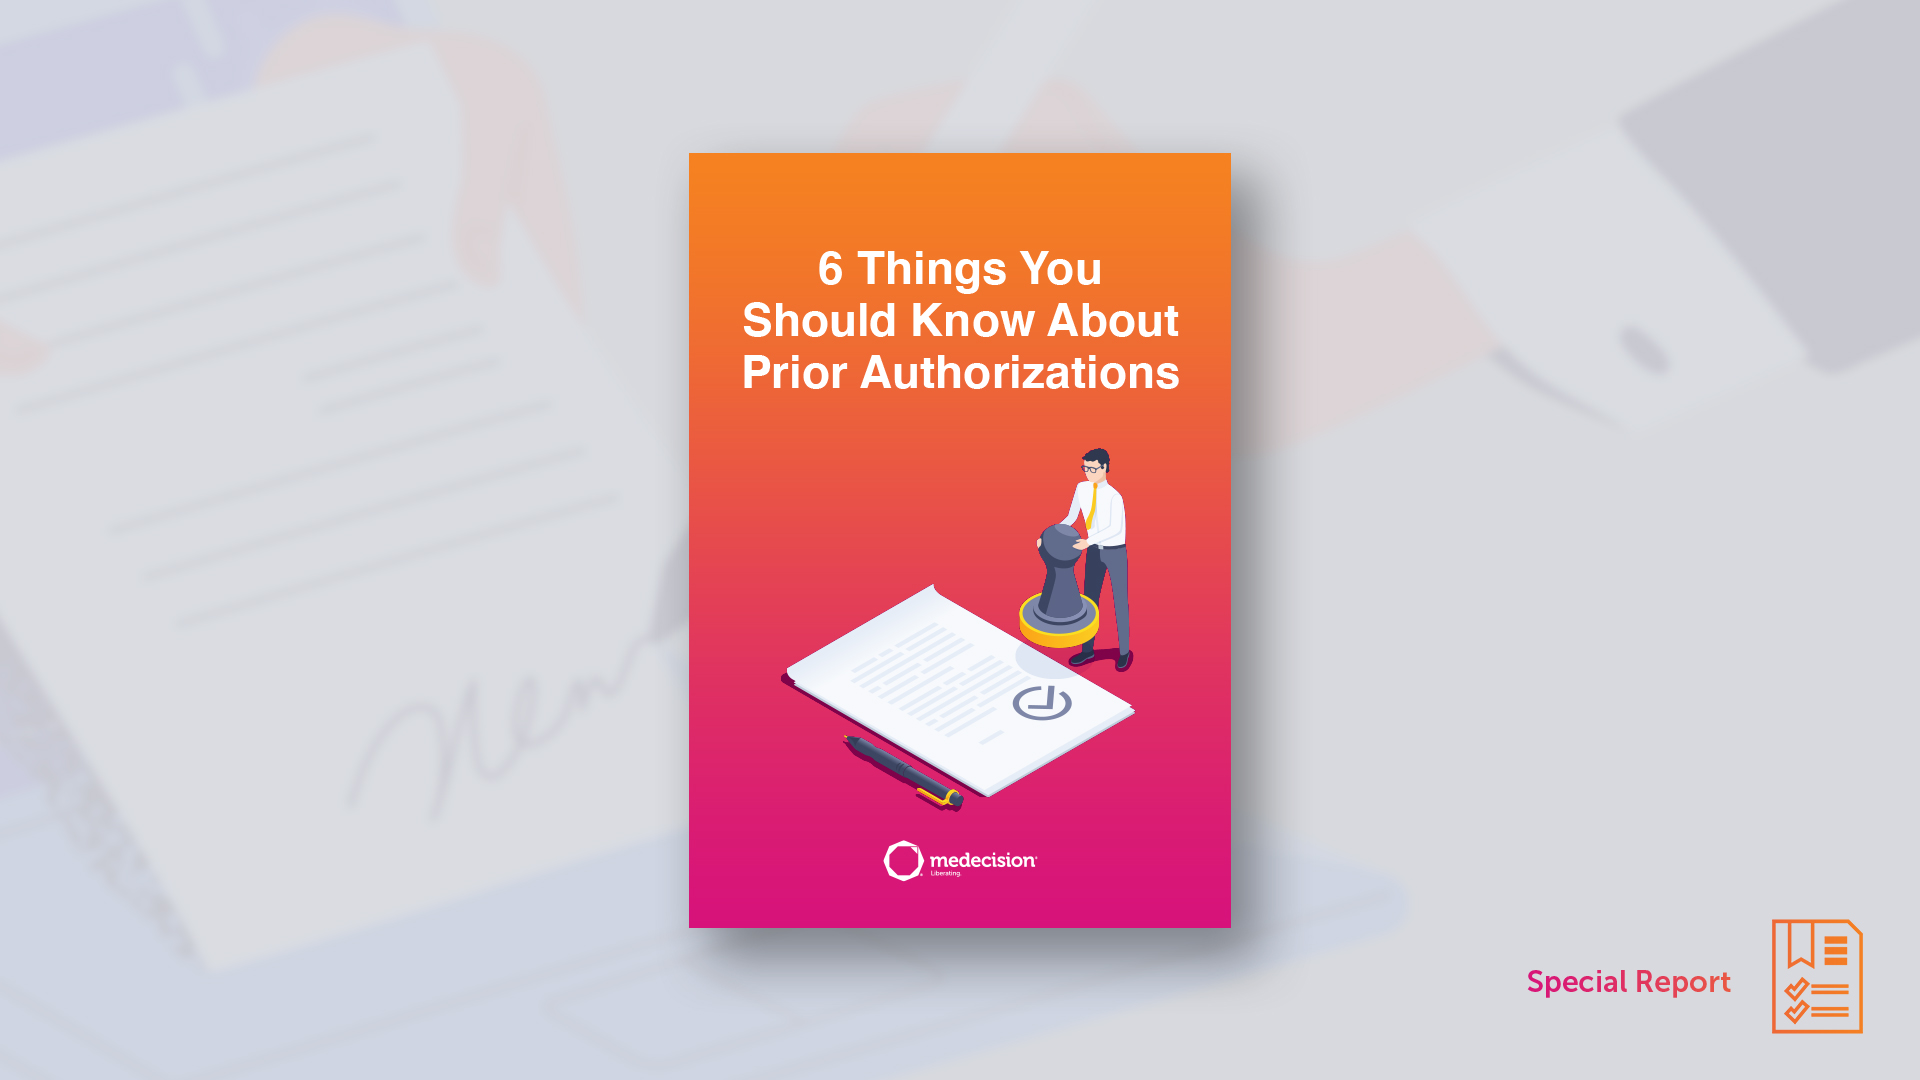 6 Things You Should Know About Prior Authorizations